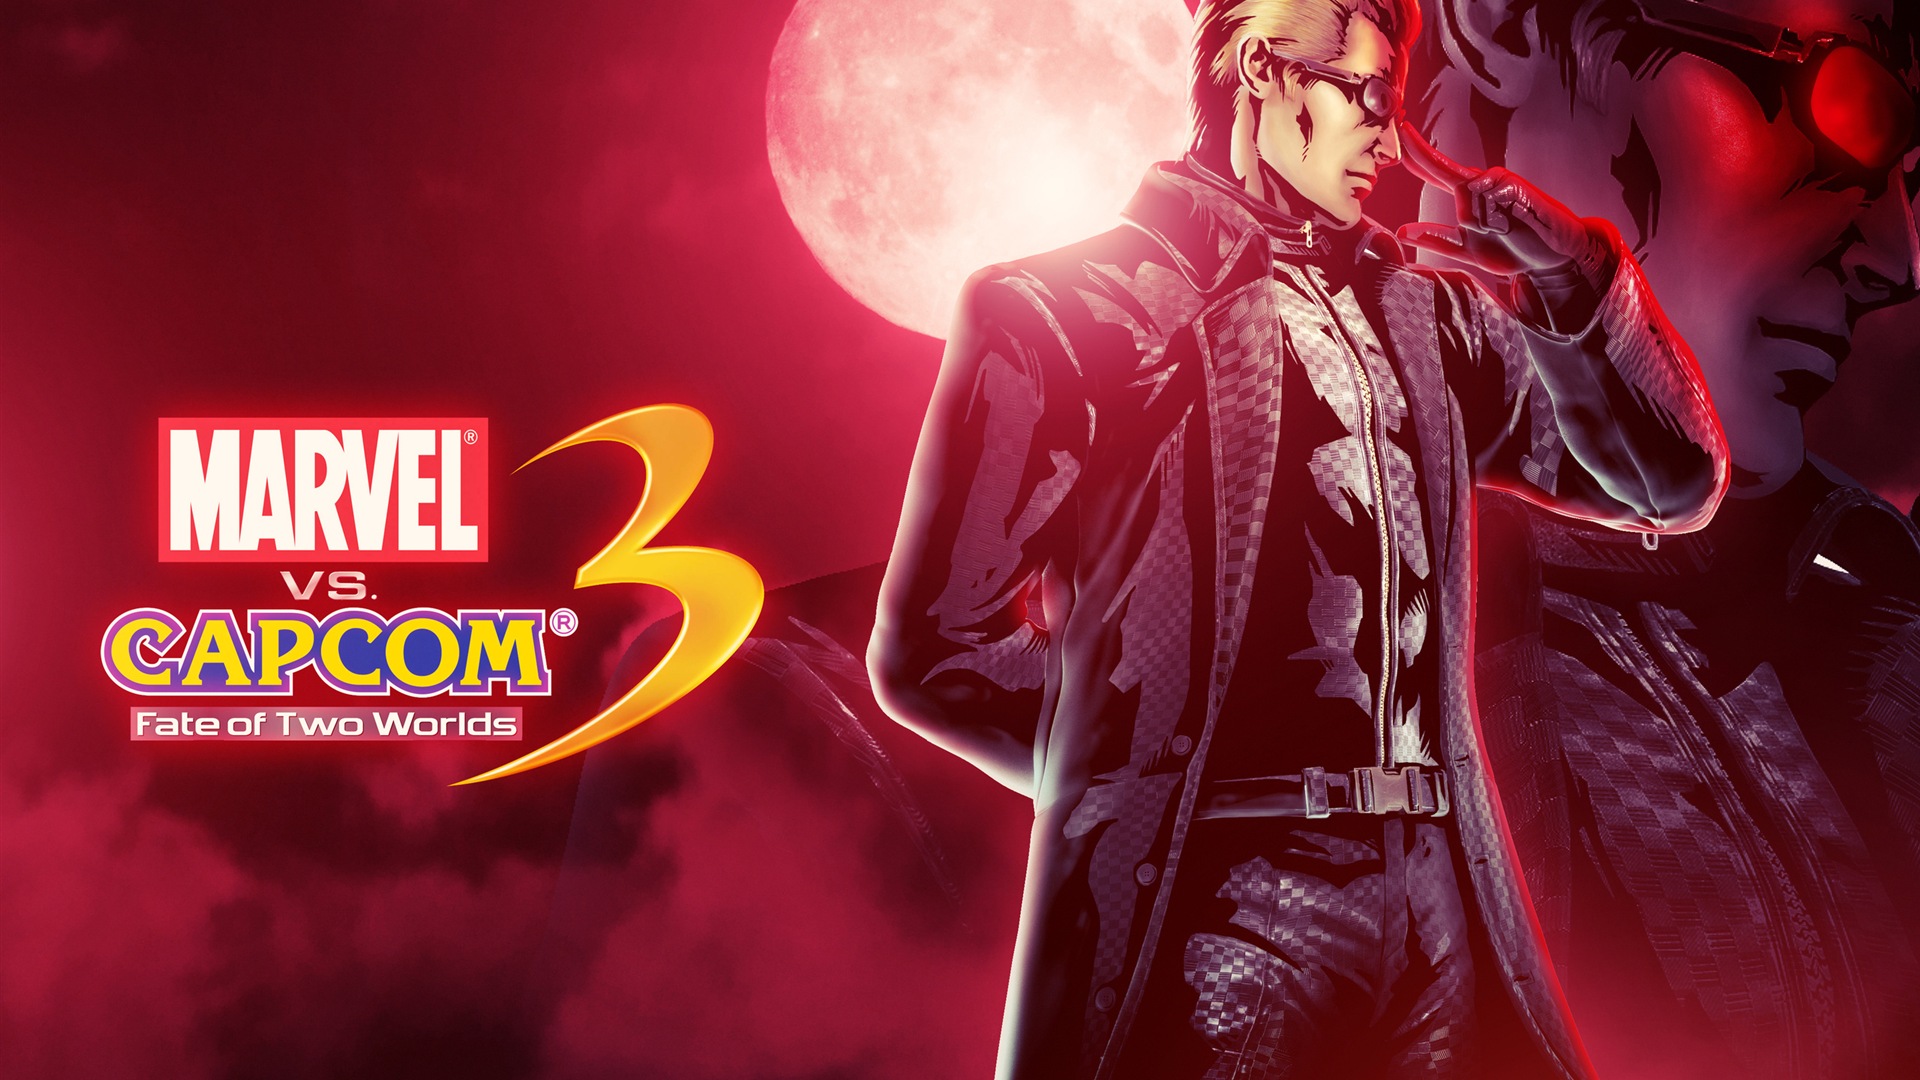 Marvel VS. Capcom 3: Fate of Two Worlds HD game wallpapers #9 - 1920x1080